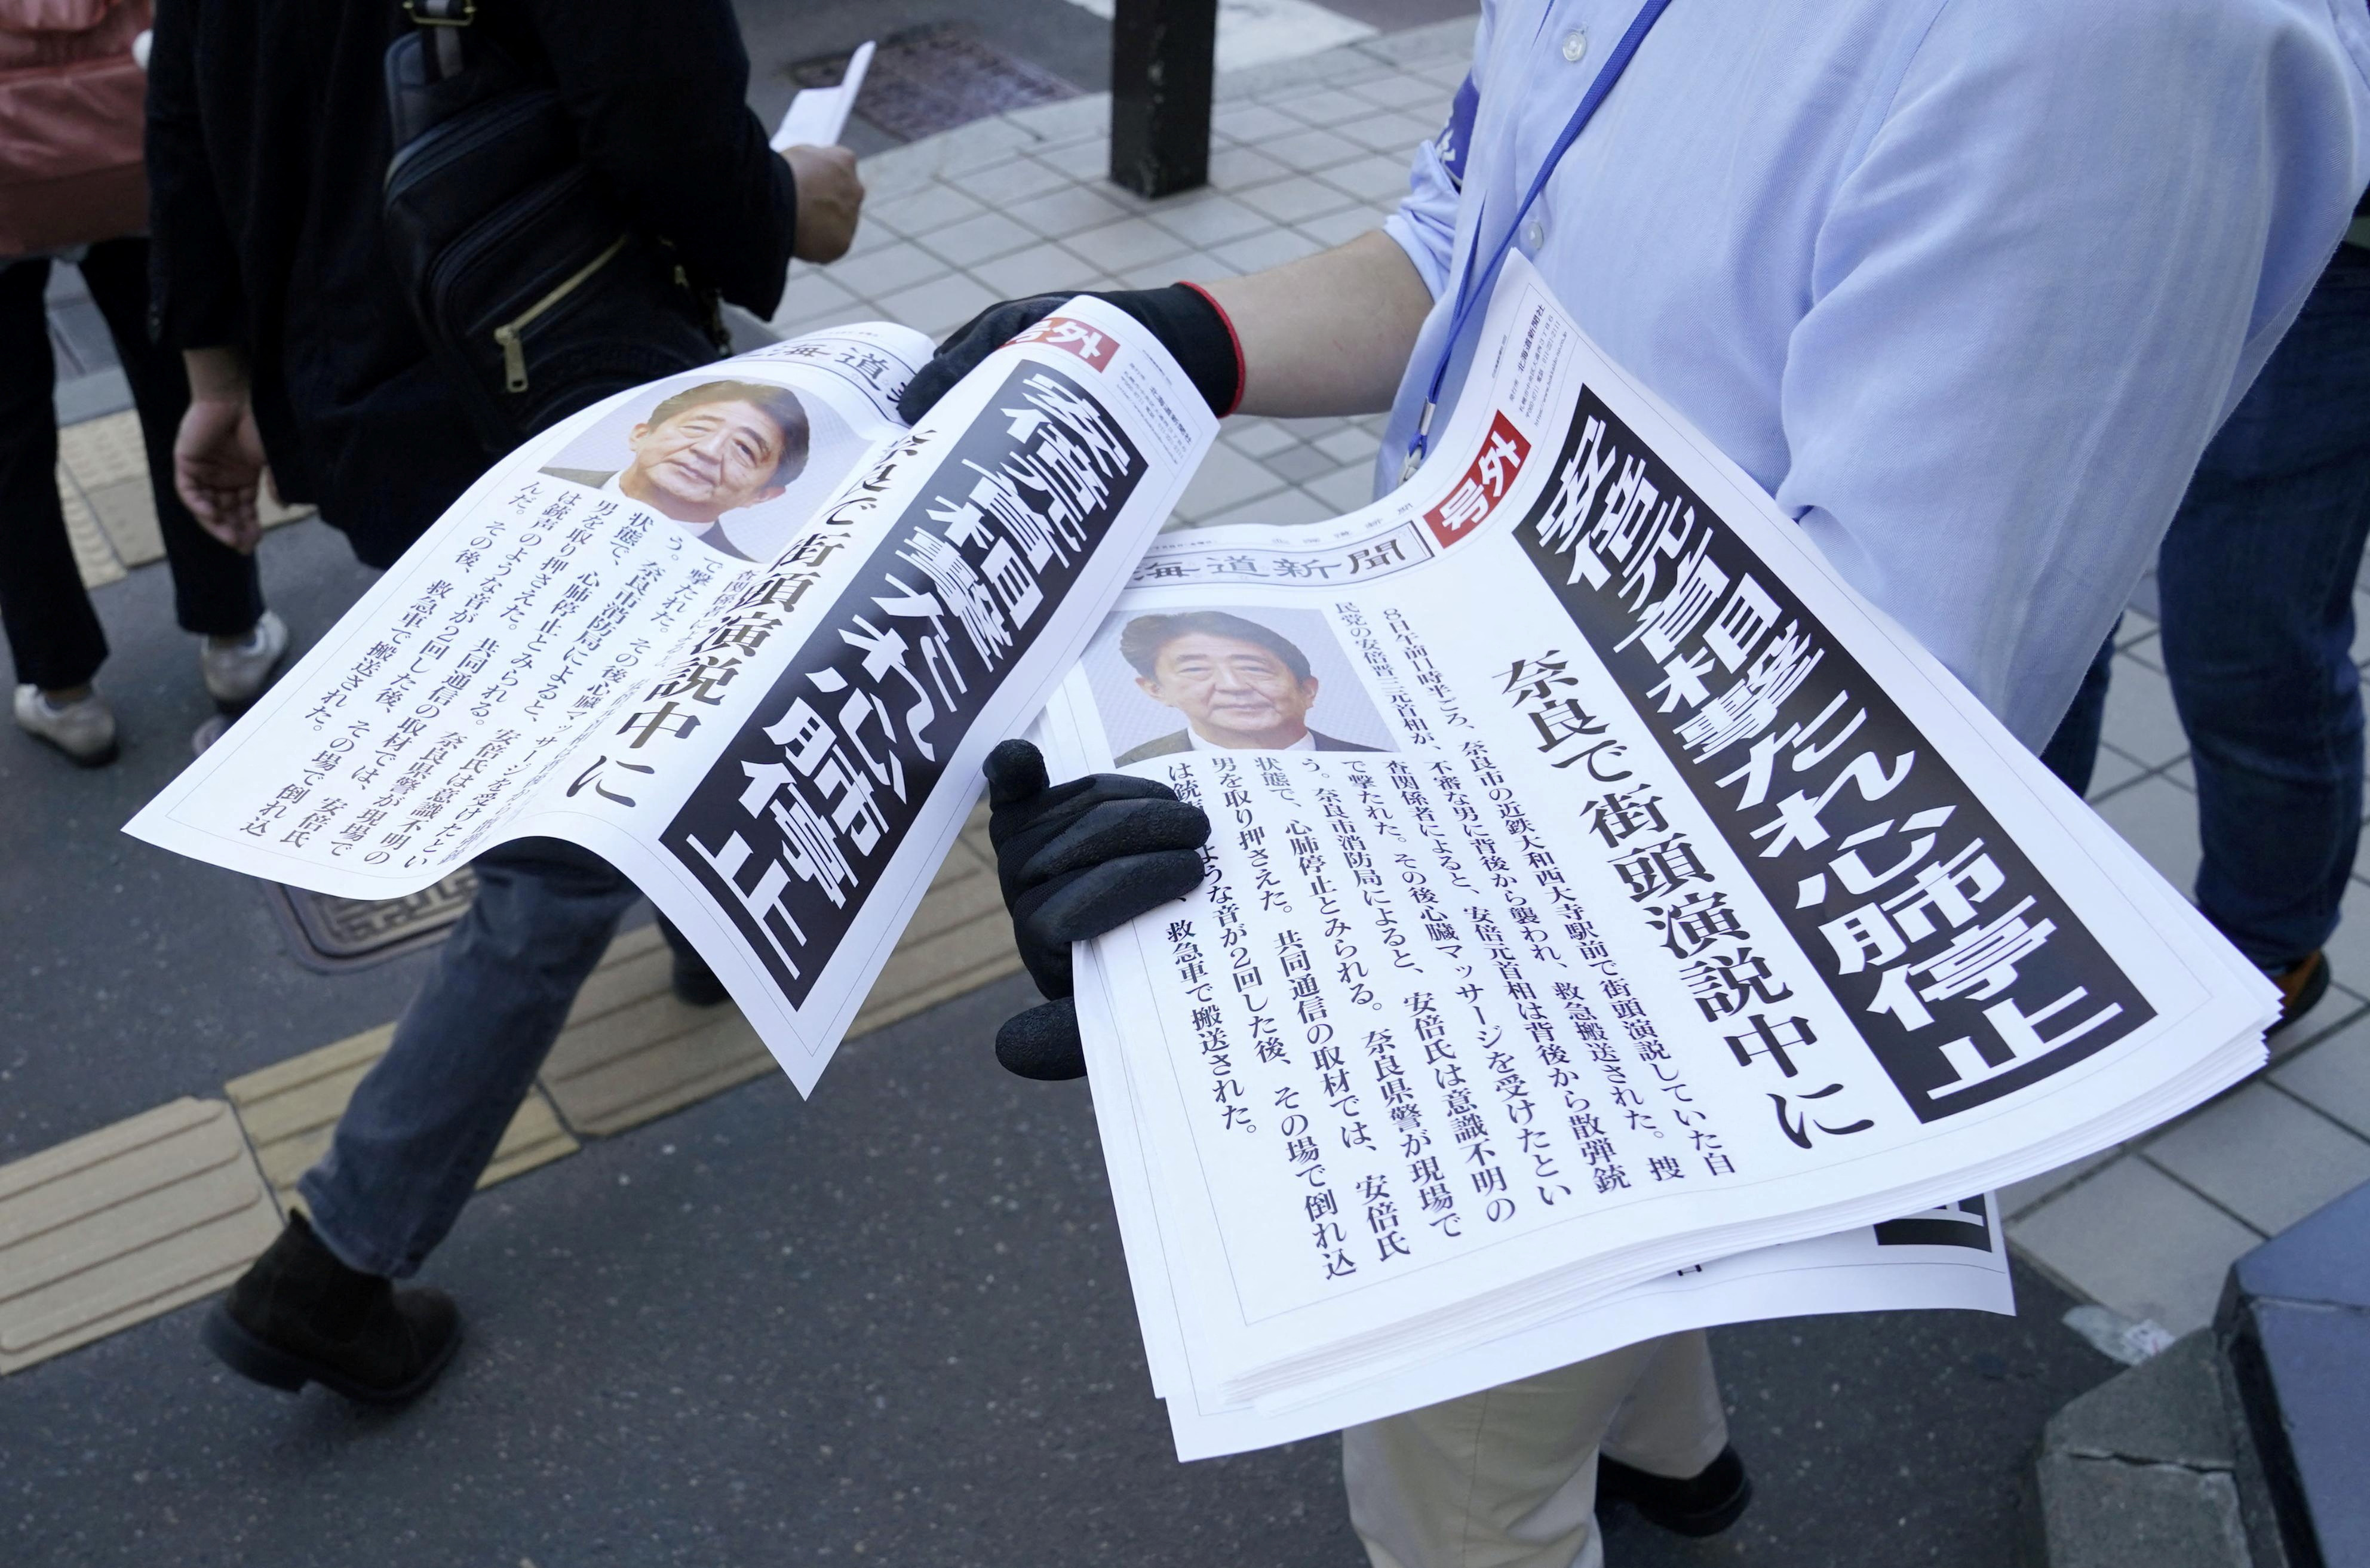 Copies of an extra edition of a newspaper is handed out to pedestrians in Sapporo, after former Japanese Prime Minister Shinzo Abe was shot, in Sapporo